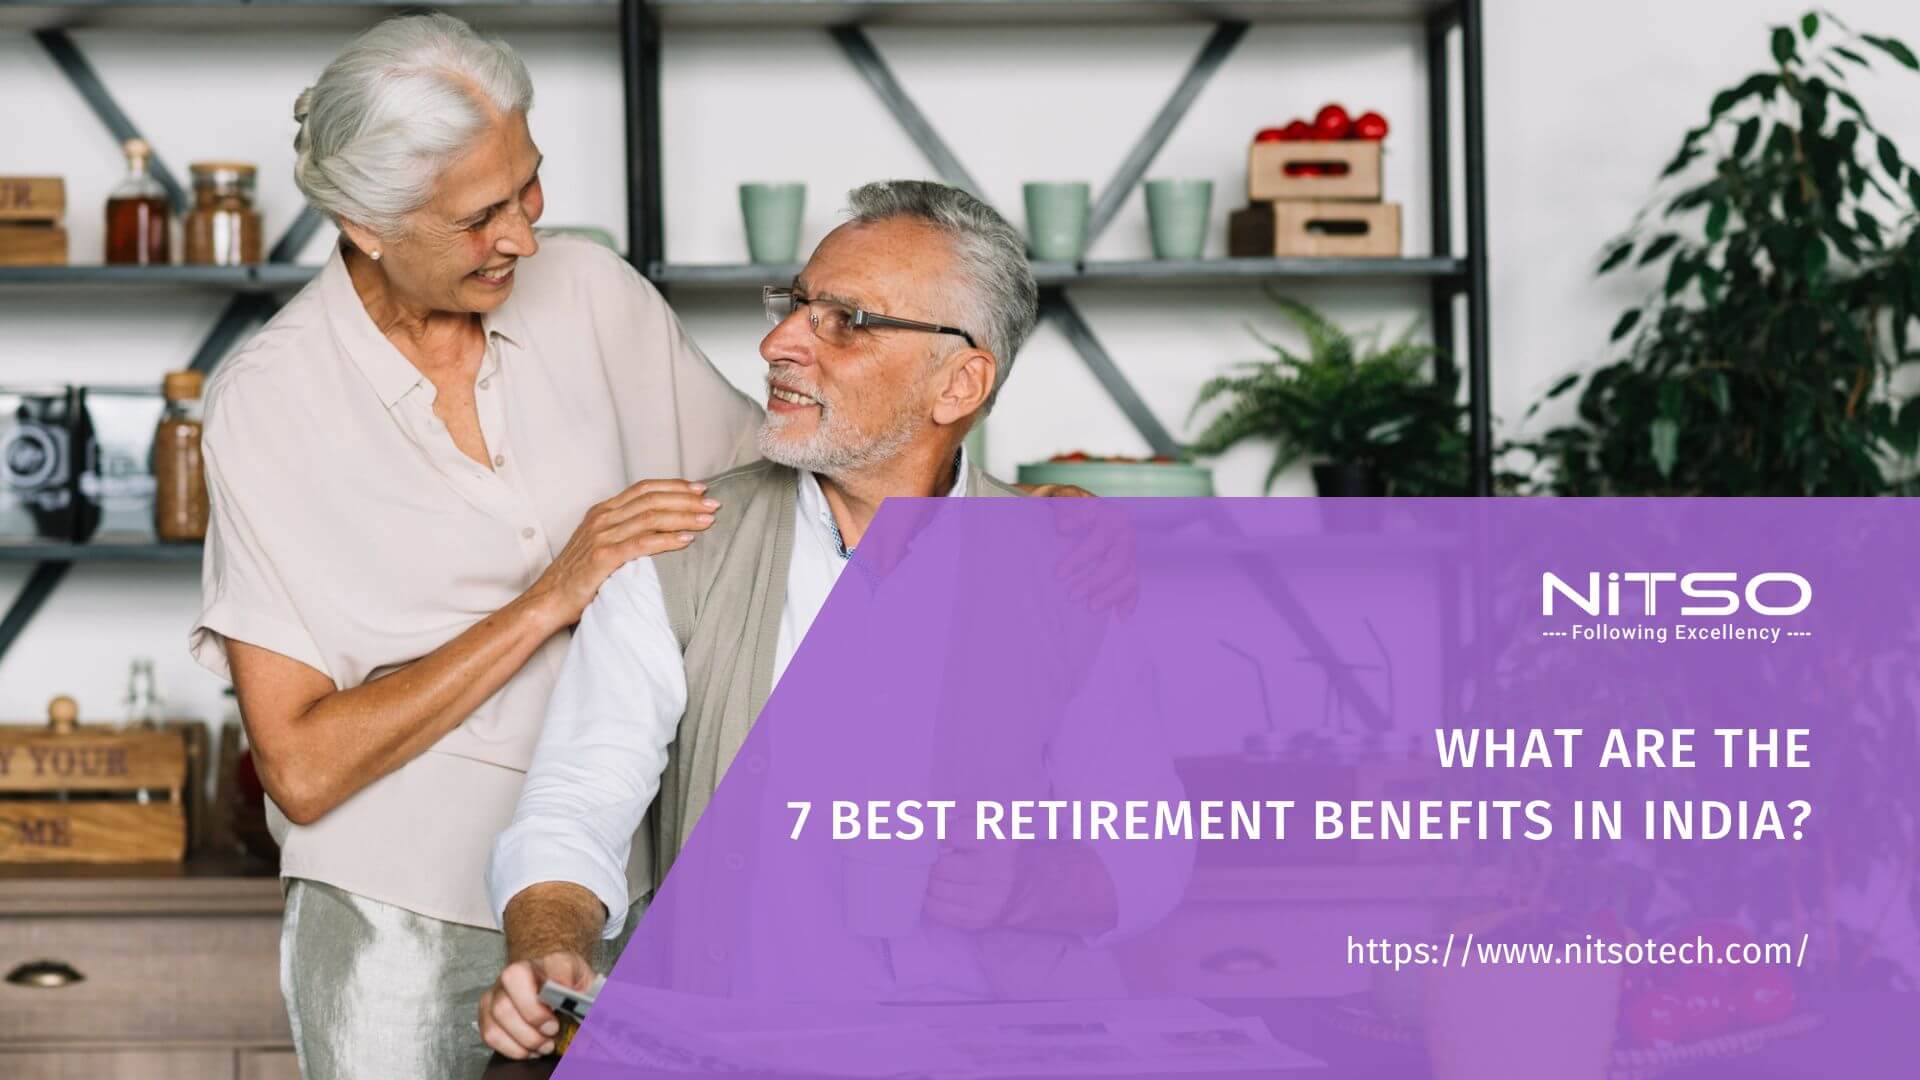 What Are the 7 Best Retirement Benefits in India?